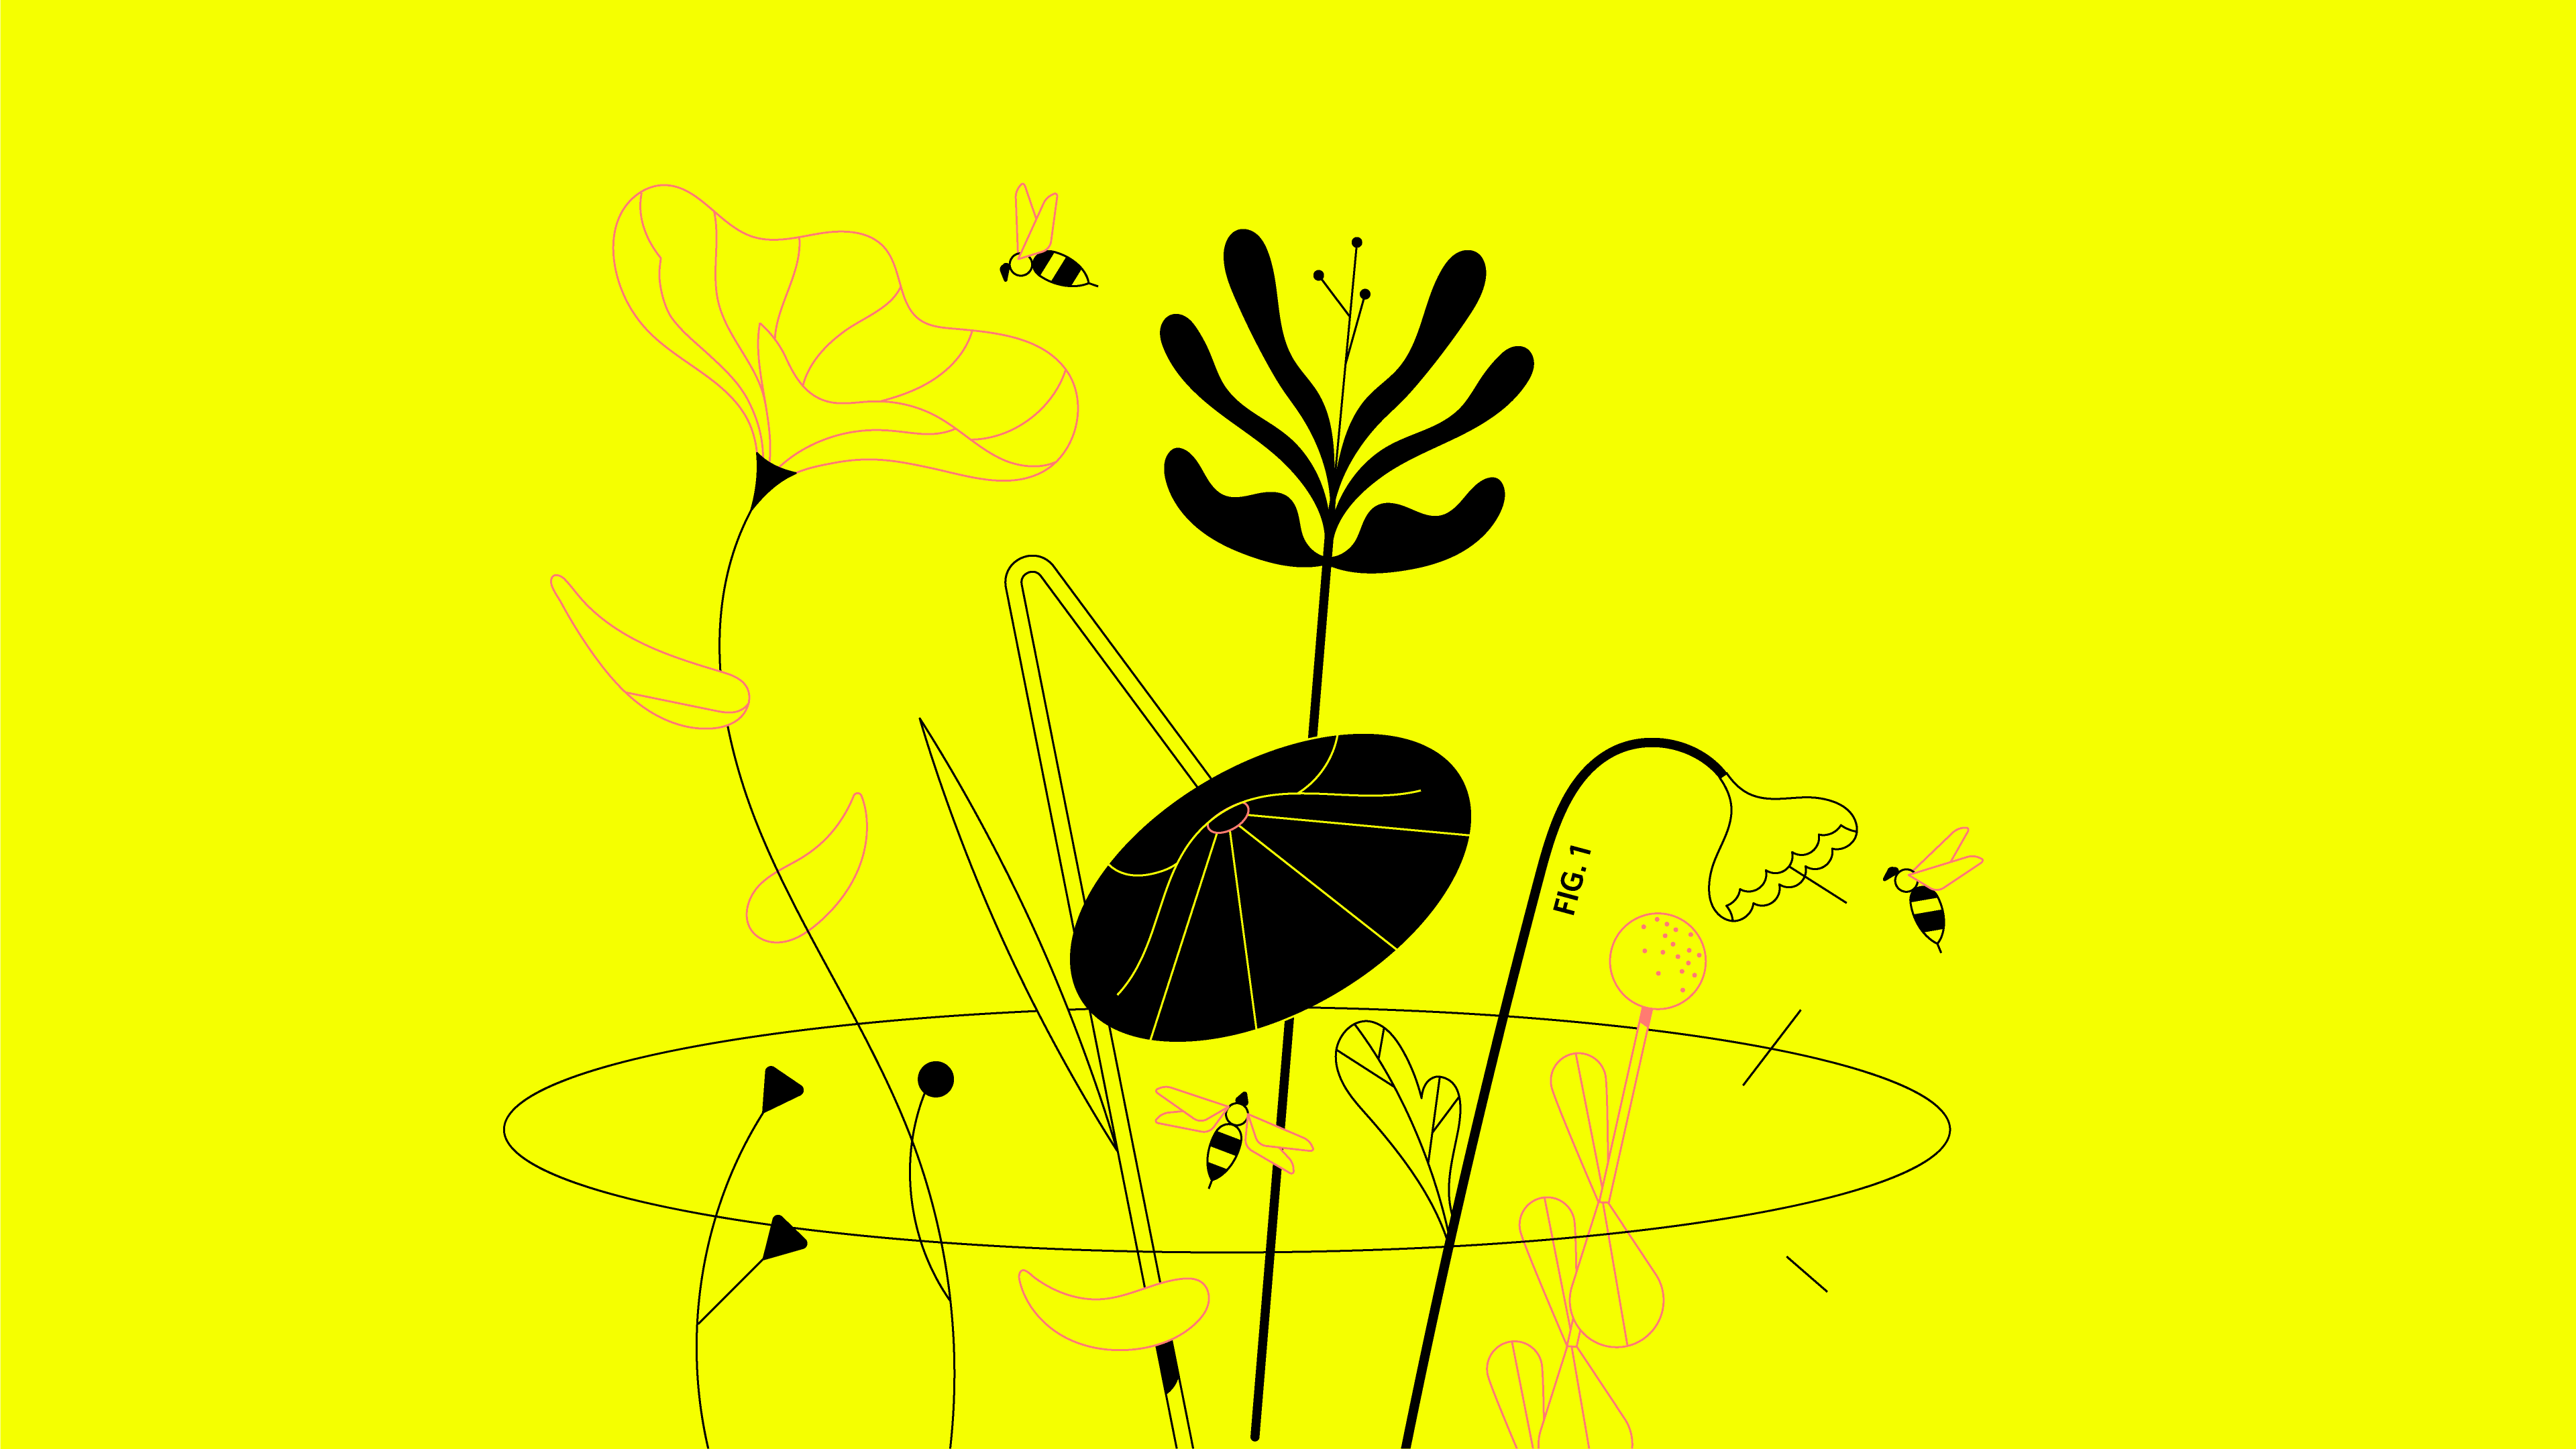 Animated image of flowers.